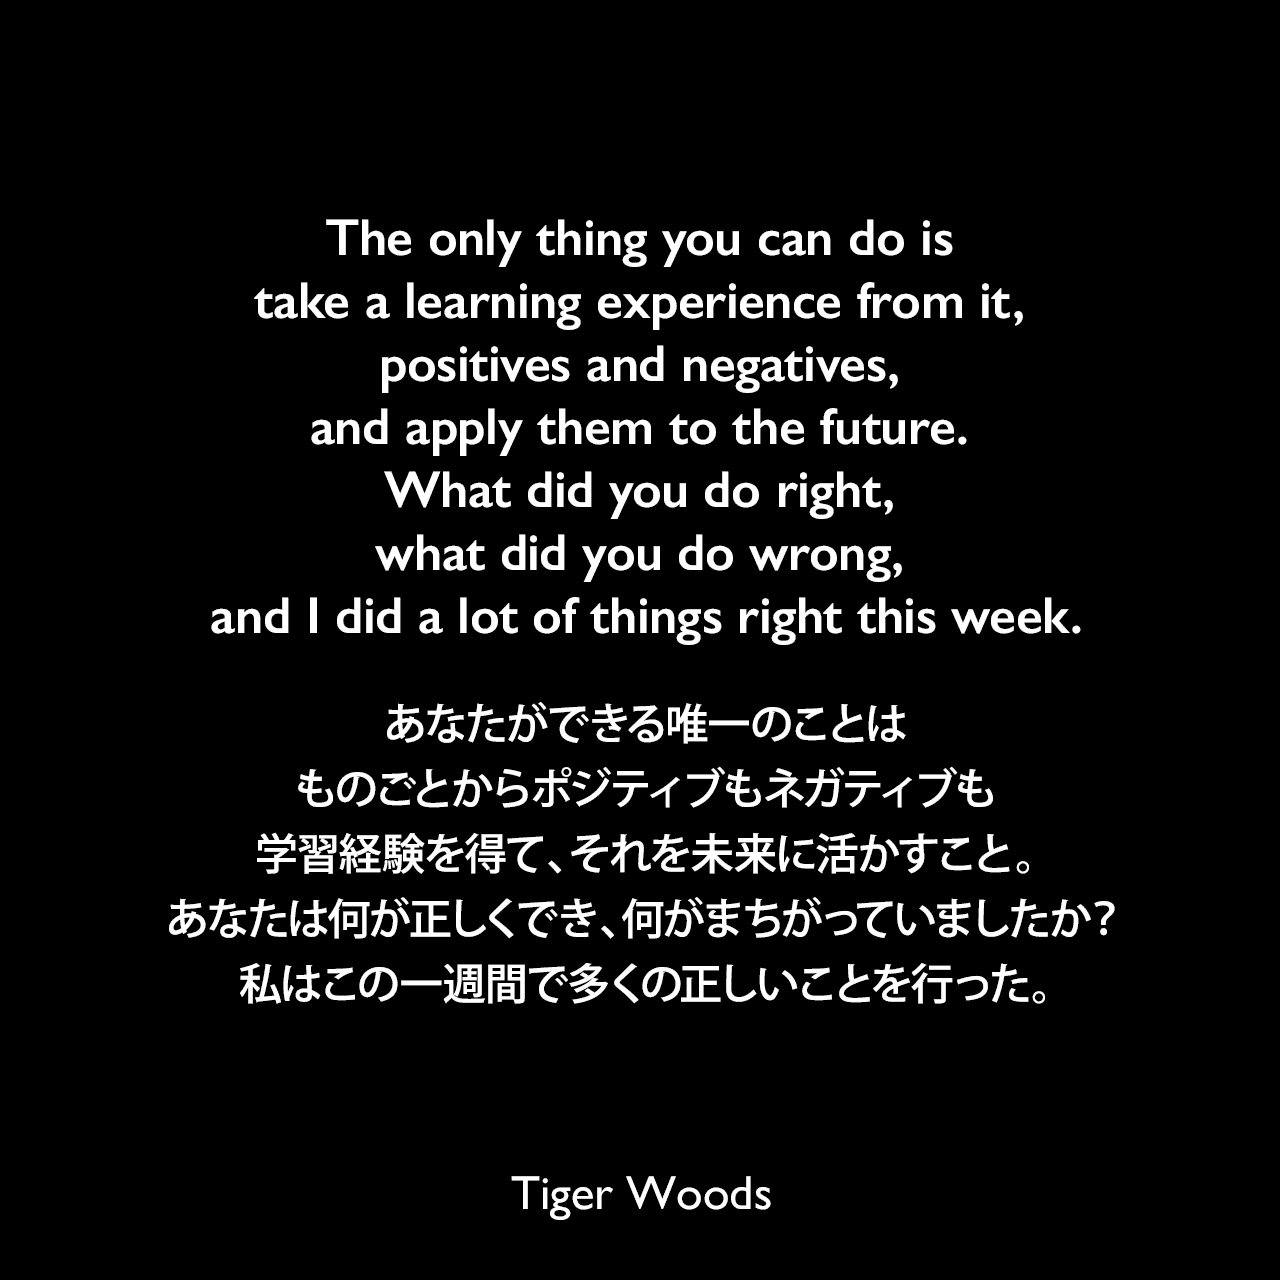 The only thing you can do is take a learning experience from it, positives and negatives, and apply them to the future. What did you do right, what did you do wrong, and I did a lot of things right this week.あなたができる唯一のことは、ものごとからポジティブもネガティブも学習経験を得て、それを未来に活かすこと。あなたは何が正しくでき、何がまちがっていましたか？私はこの一週間で多くの正しいことを行った。Tiger Woods